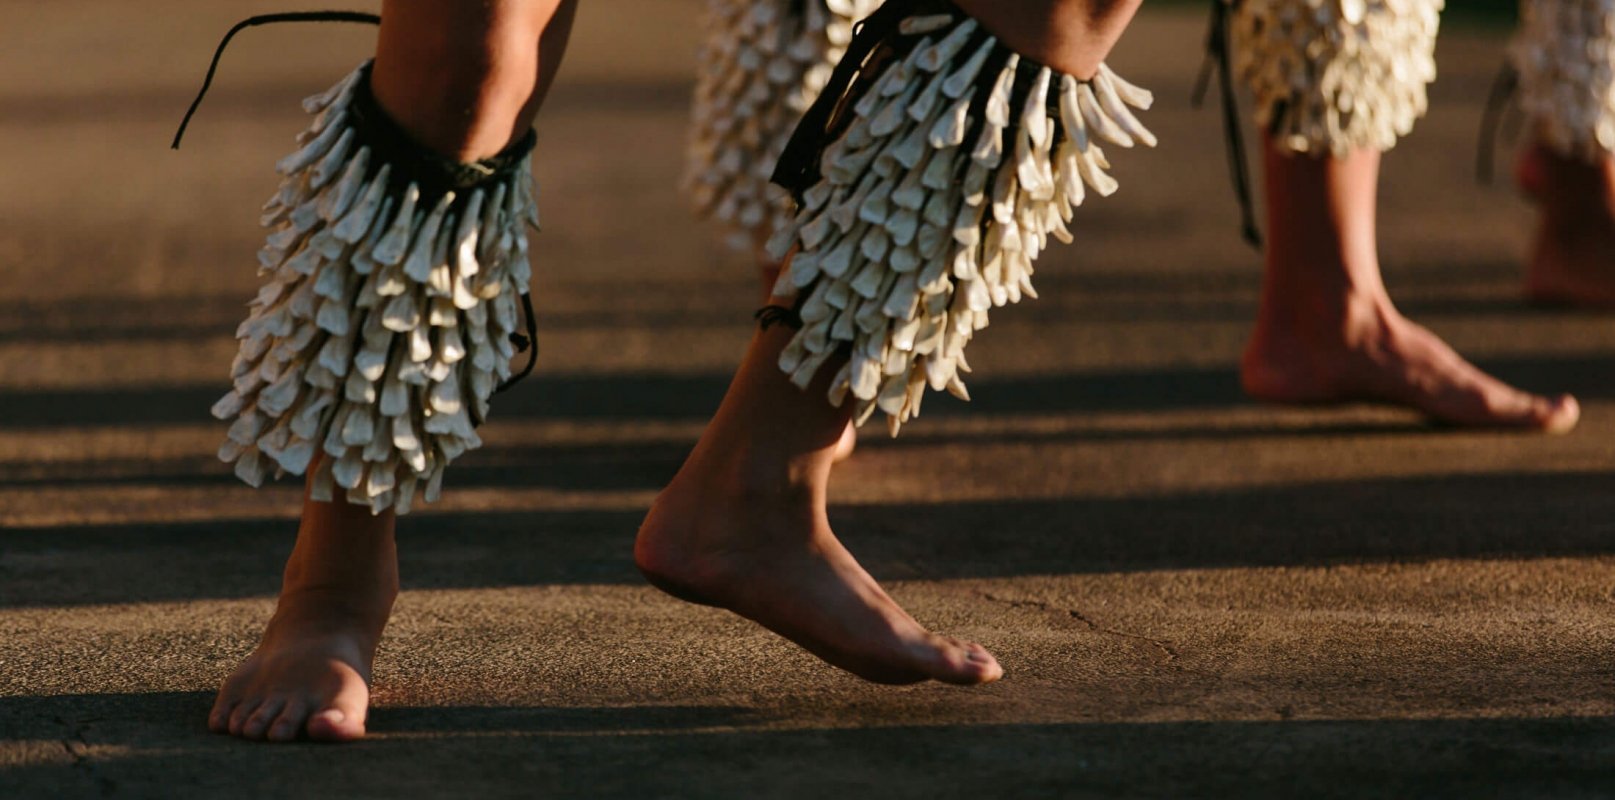 two sets of legs hop while wearing shells and dancing the luau